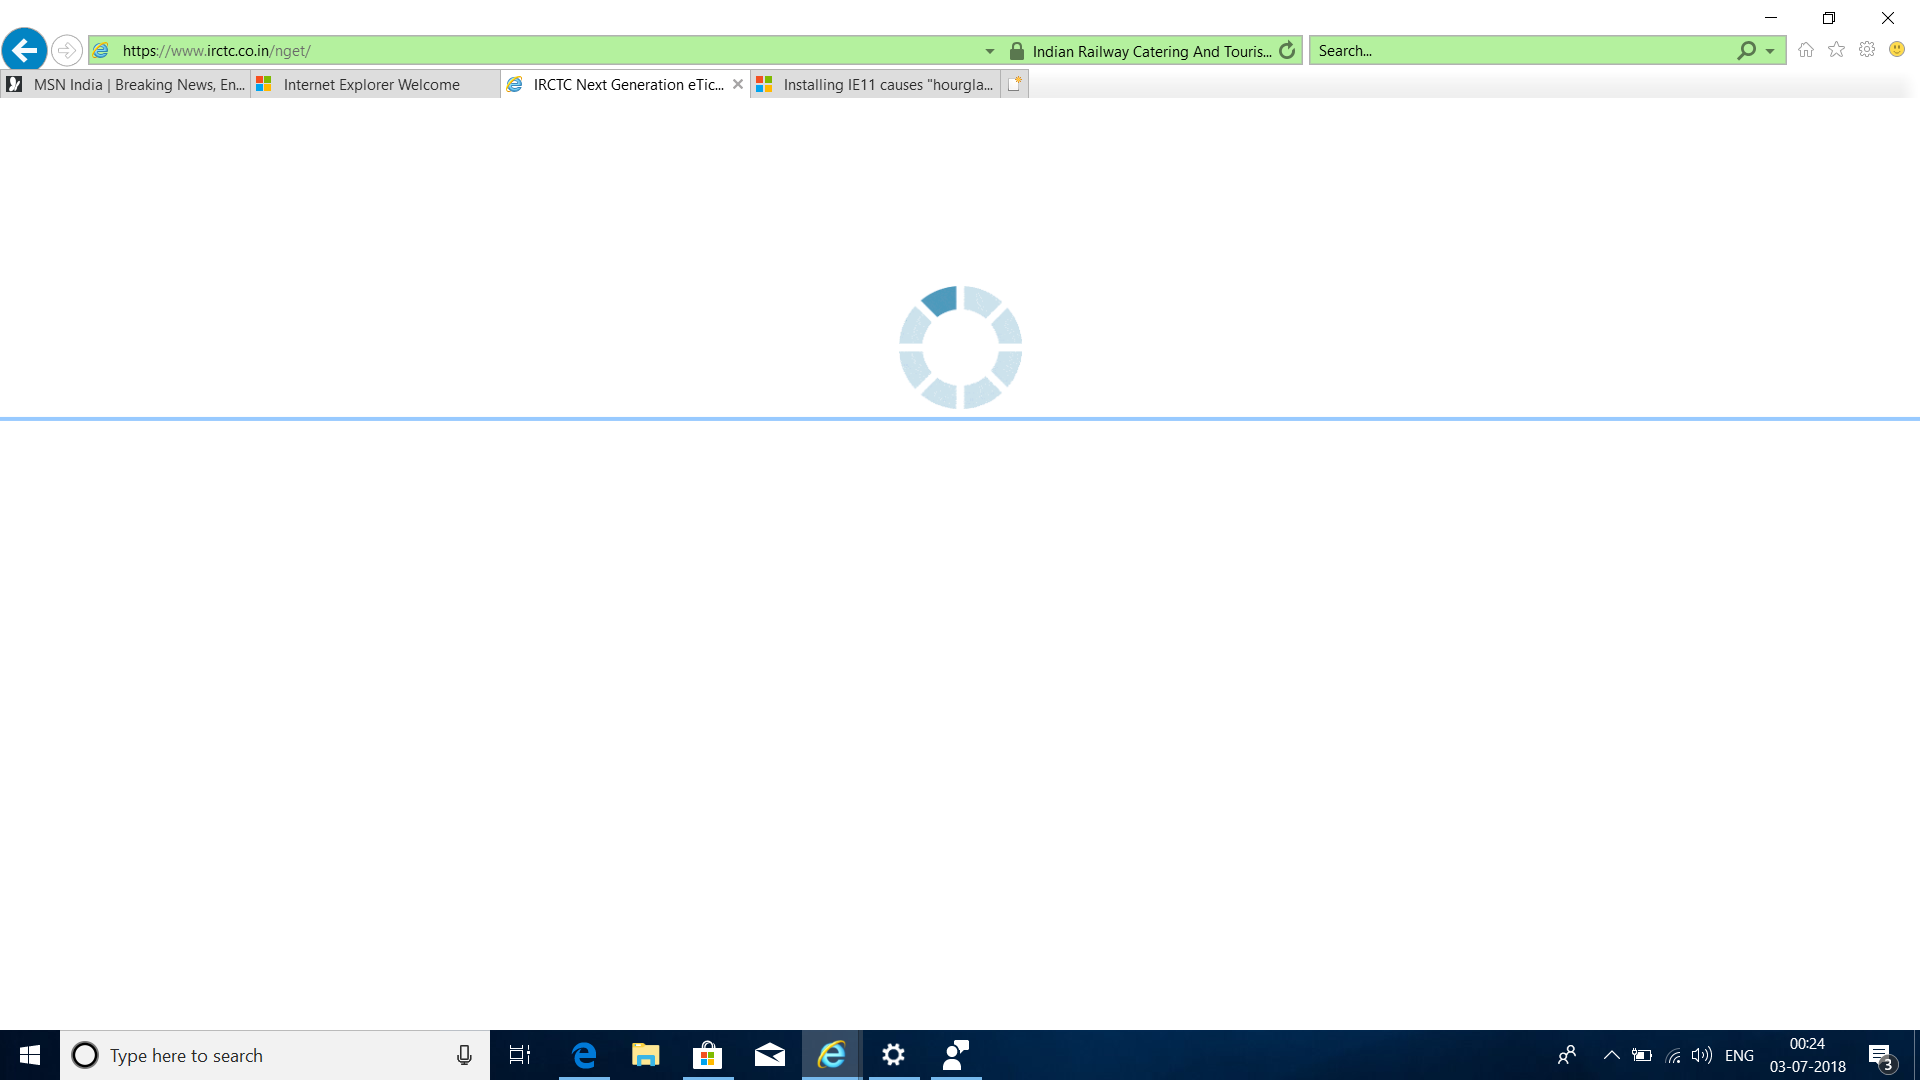 Unable to open a website "https://www.irctc.co.in" - Microsoft ...